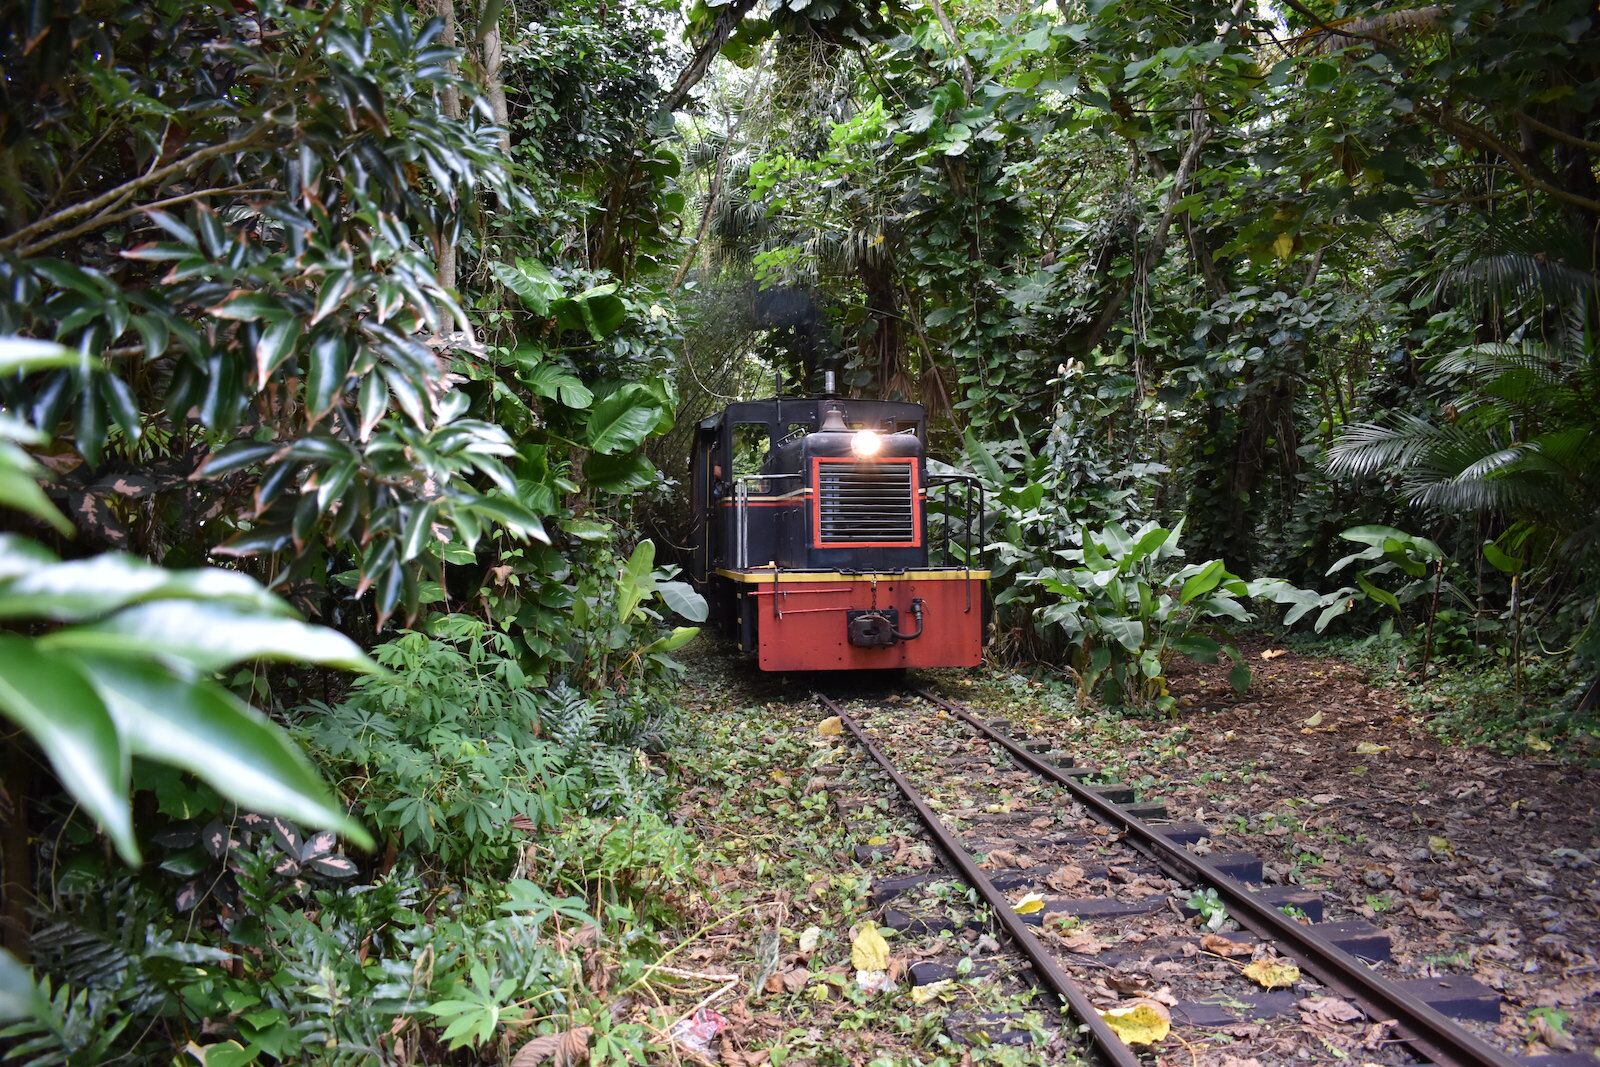 Train ride in the forest in Kauai, Hawaii